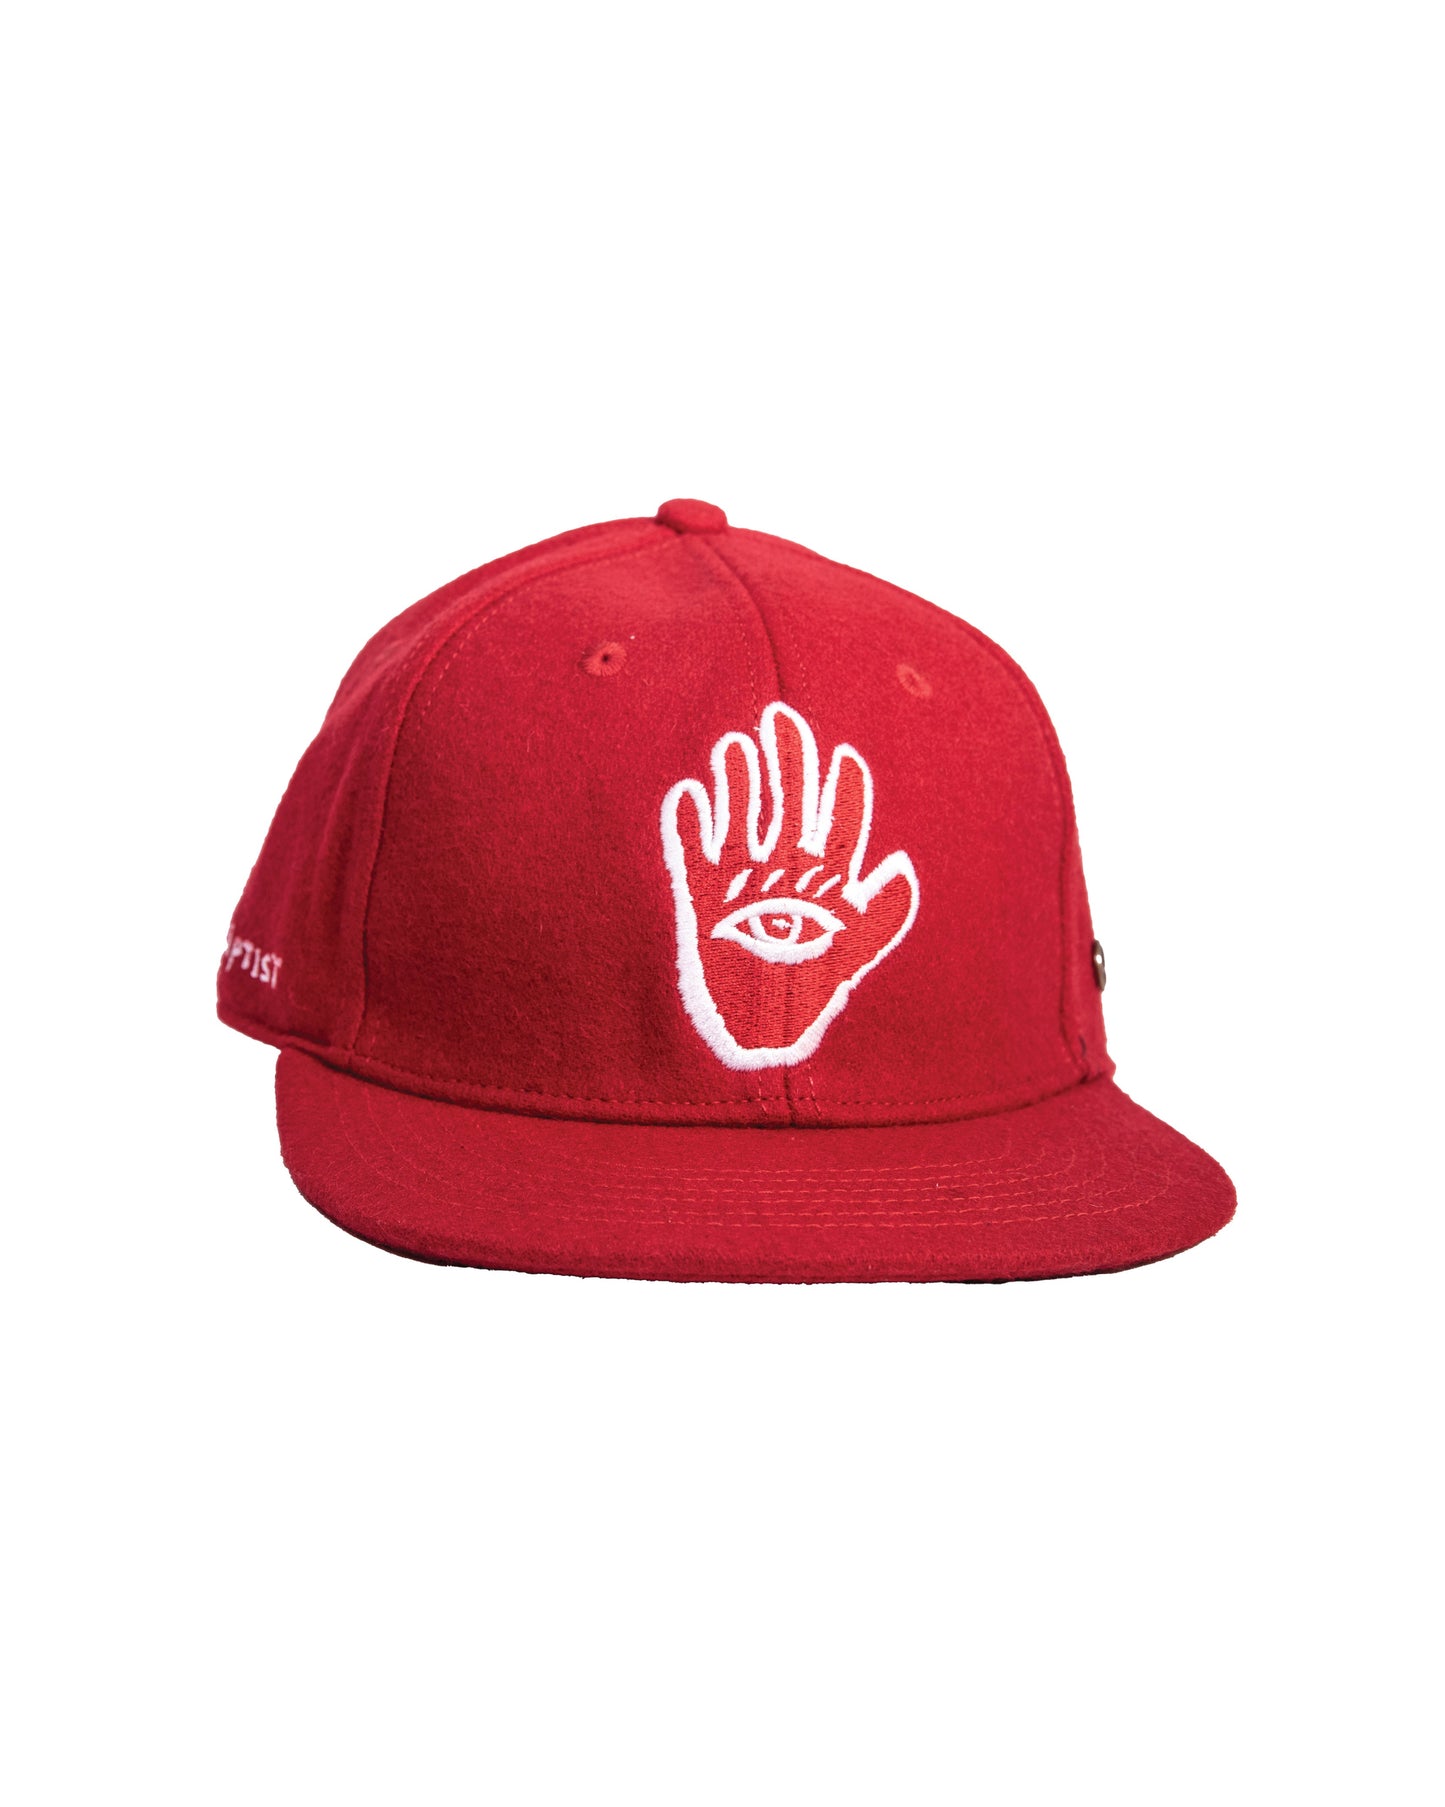 Marty Baptist X Fbs Miracle Cap - Red